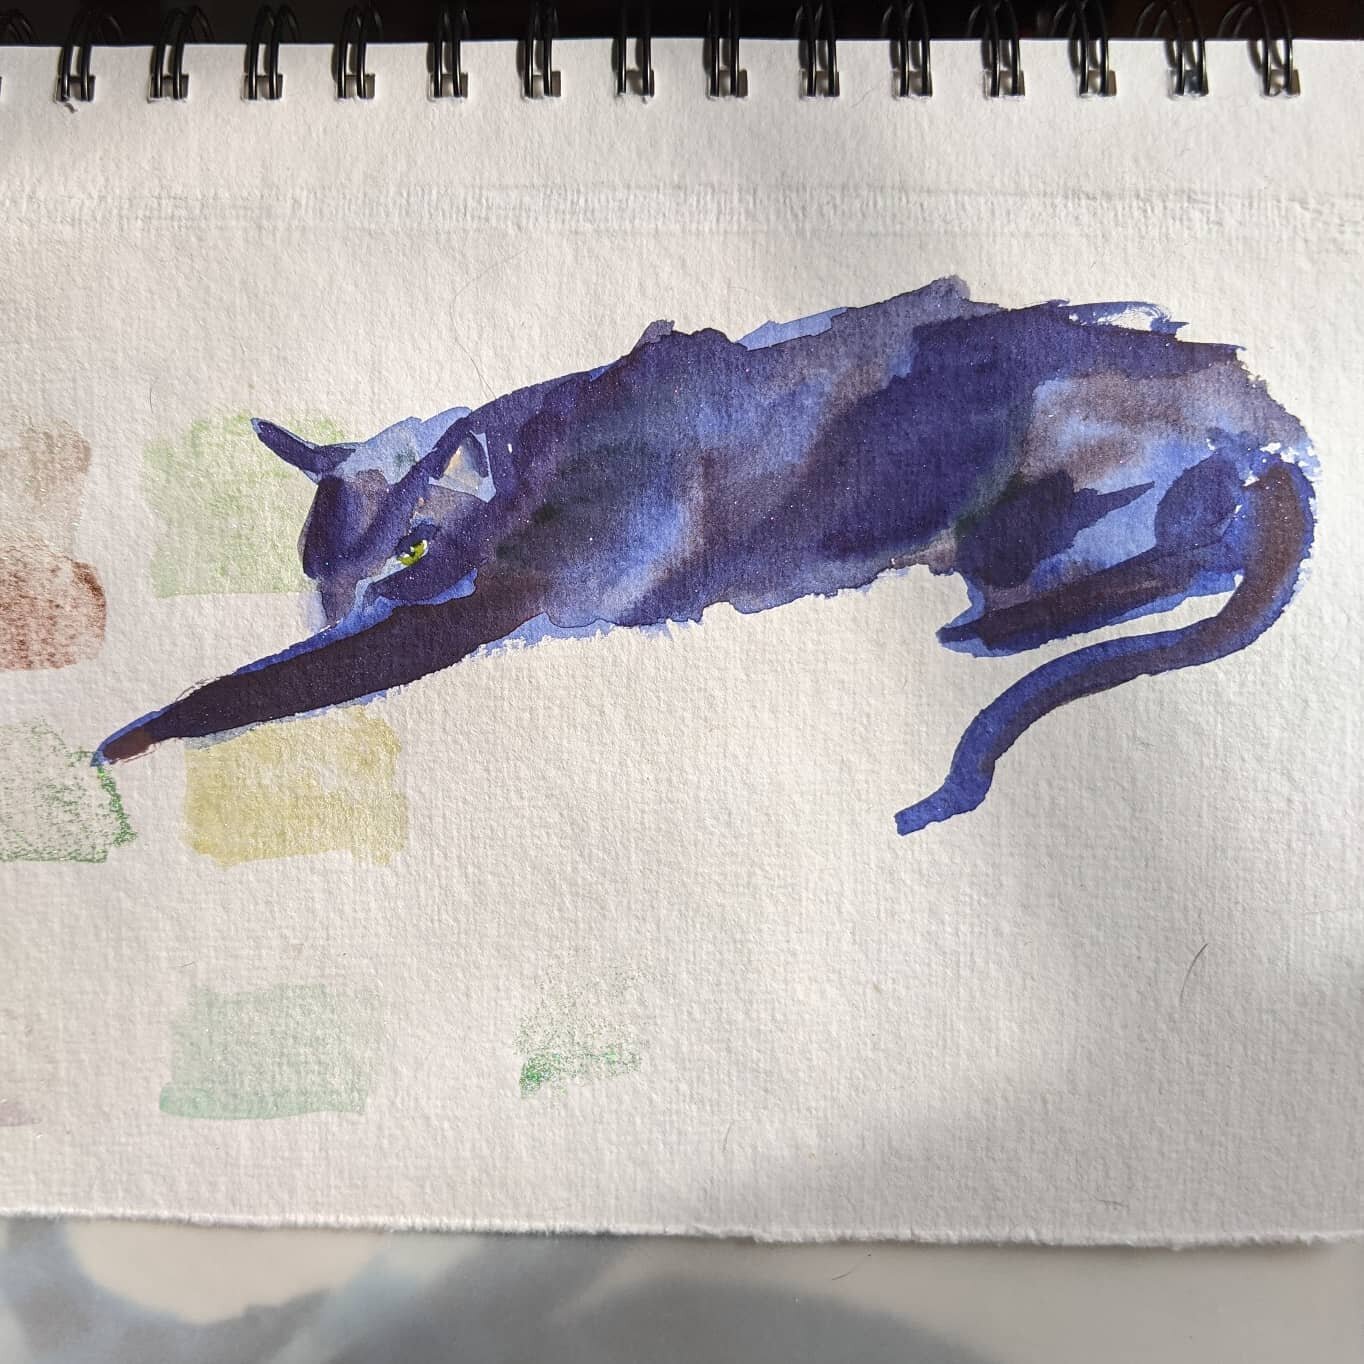 Watercolor cat studies
Beanie puddles
Trying to loosen up my brushwork and color
I think? It helps my oil painting work, too

#beampaints #beampaintstones #cat #blackcat #catpainting #painting #studies #watercolor #sketchbook